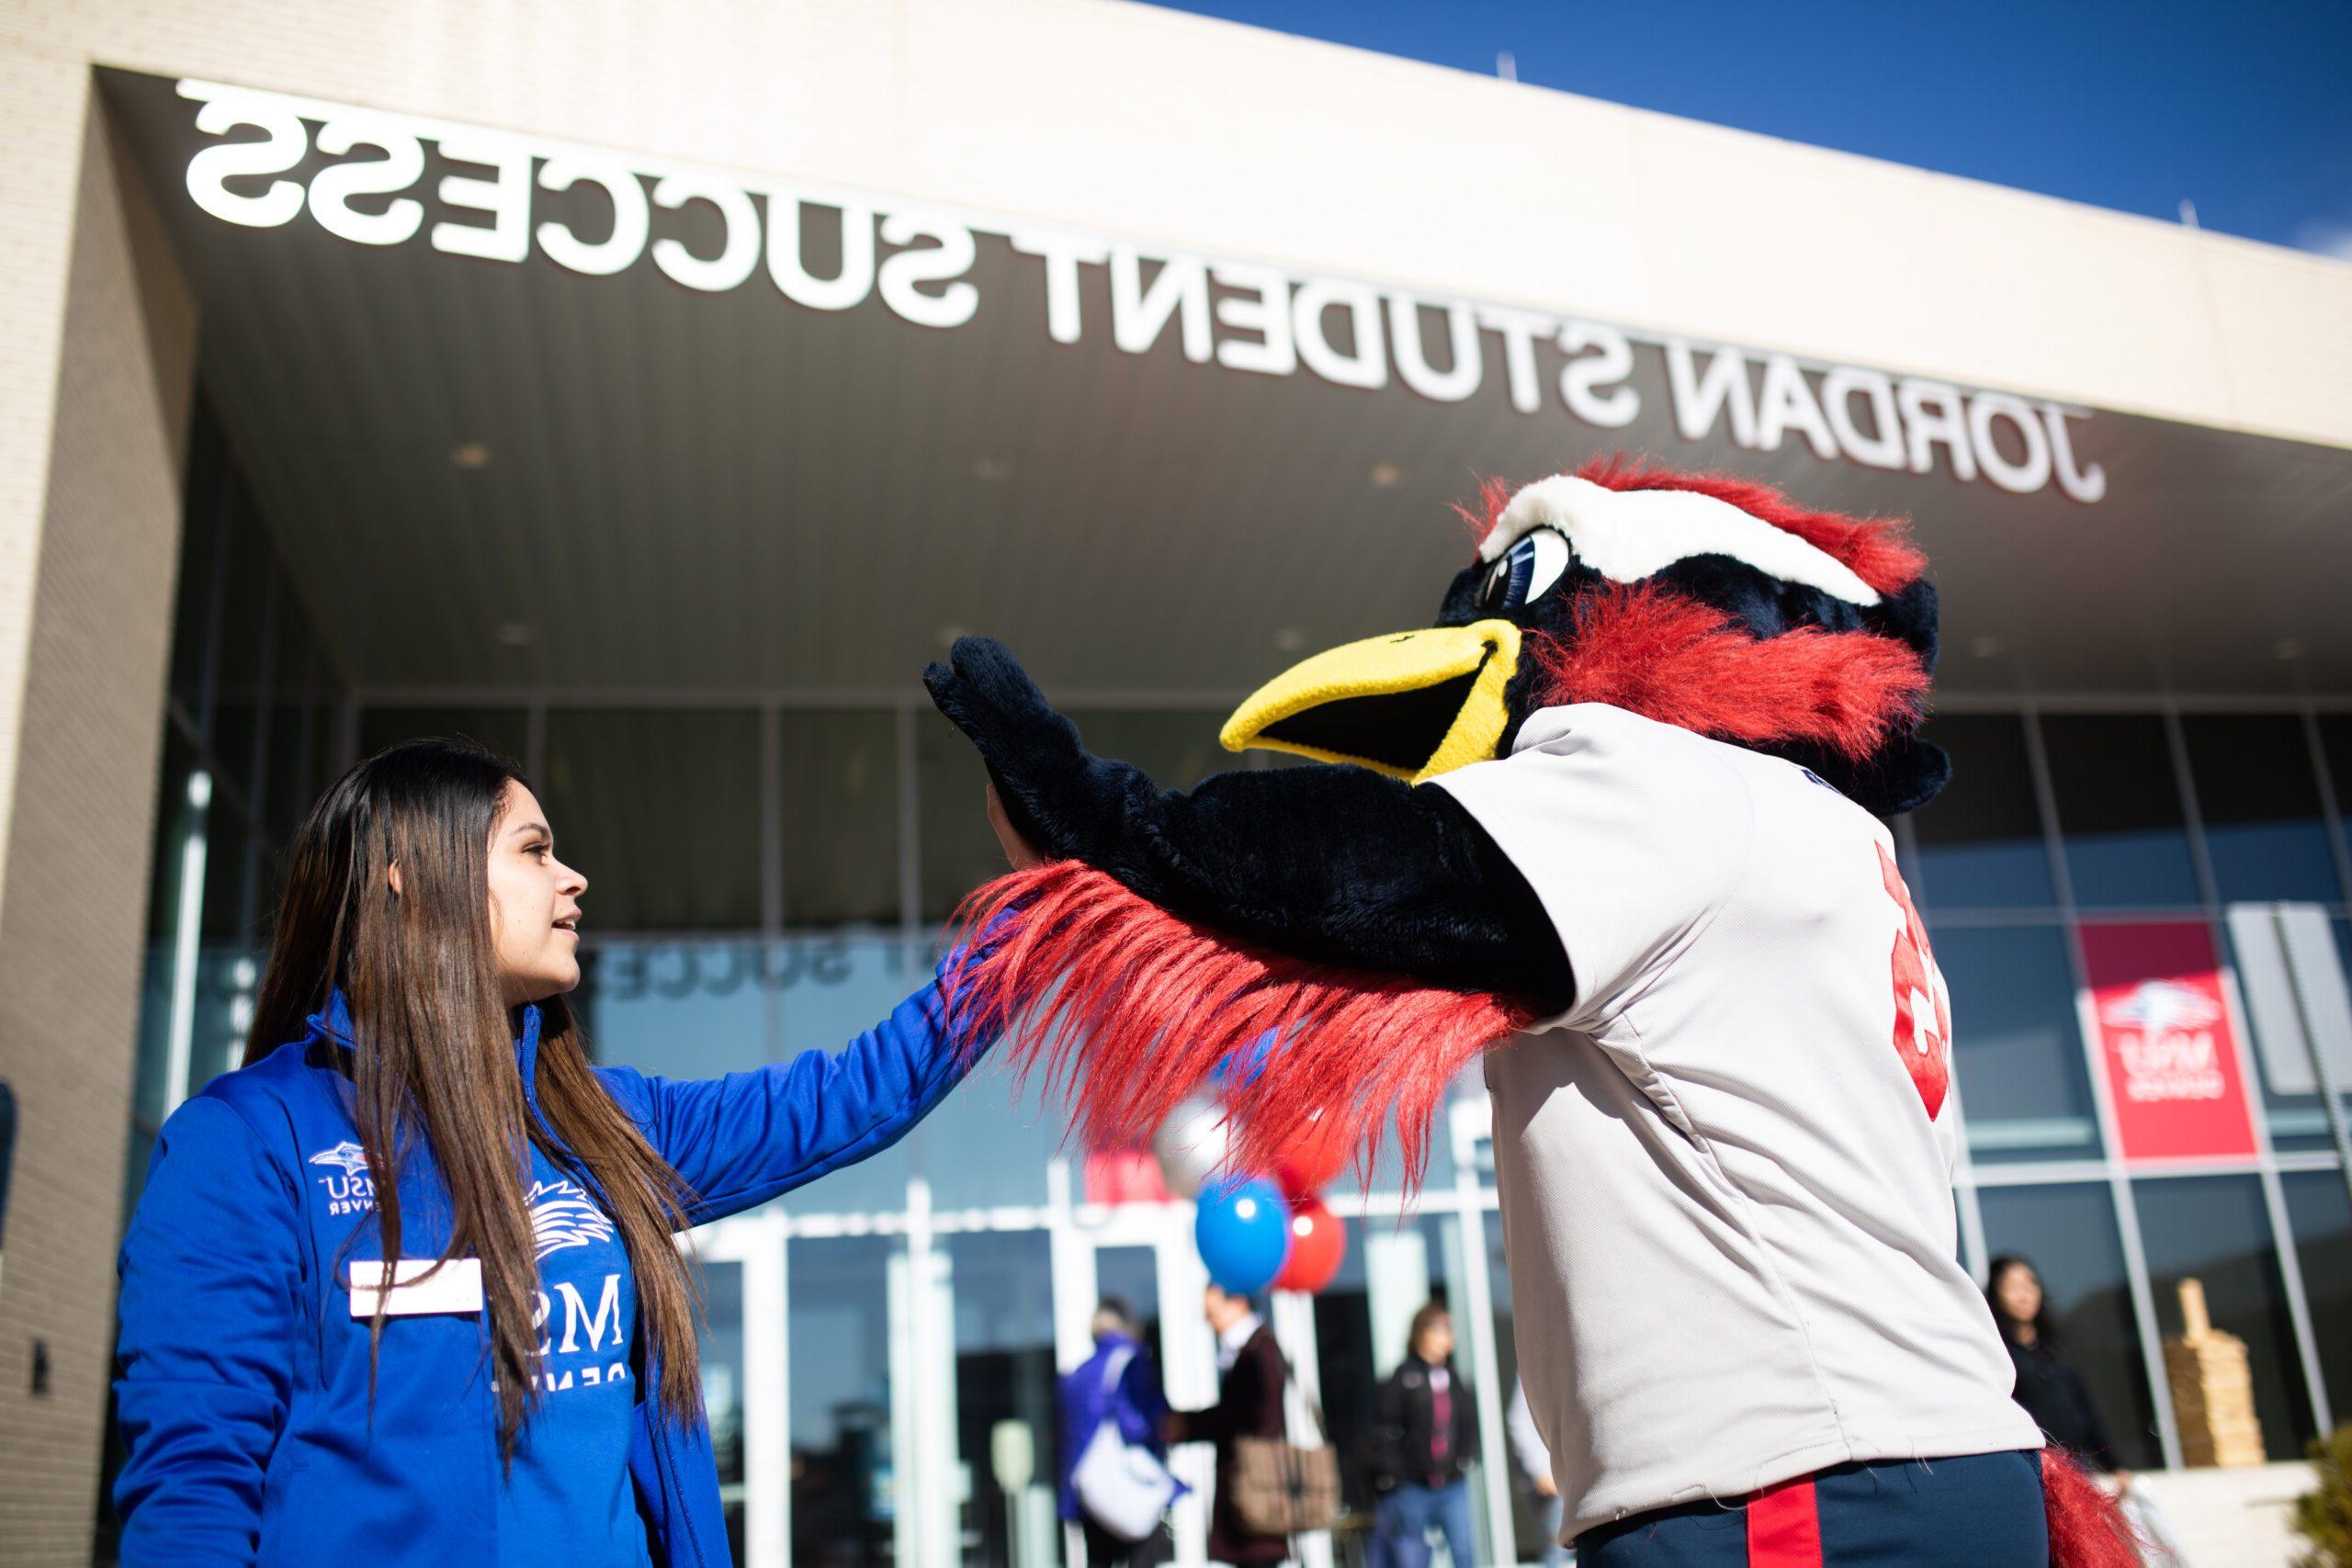 Rowdy the Roadrunner, 密歇根州立大学丹佛's mascot, high-fiving a student in front of the Jordan Student Success Building